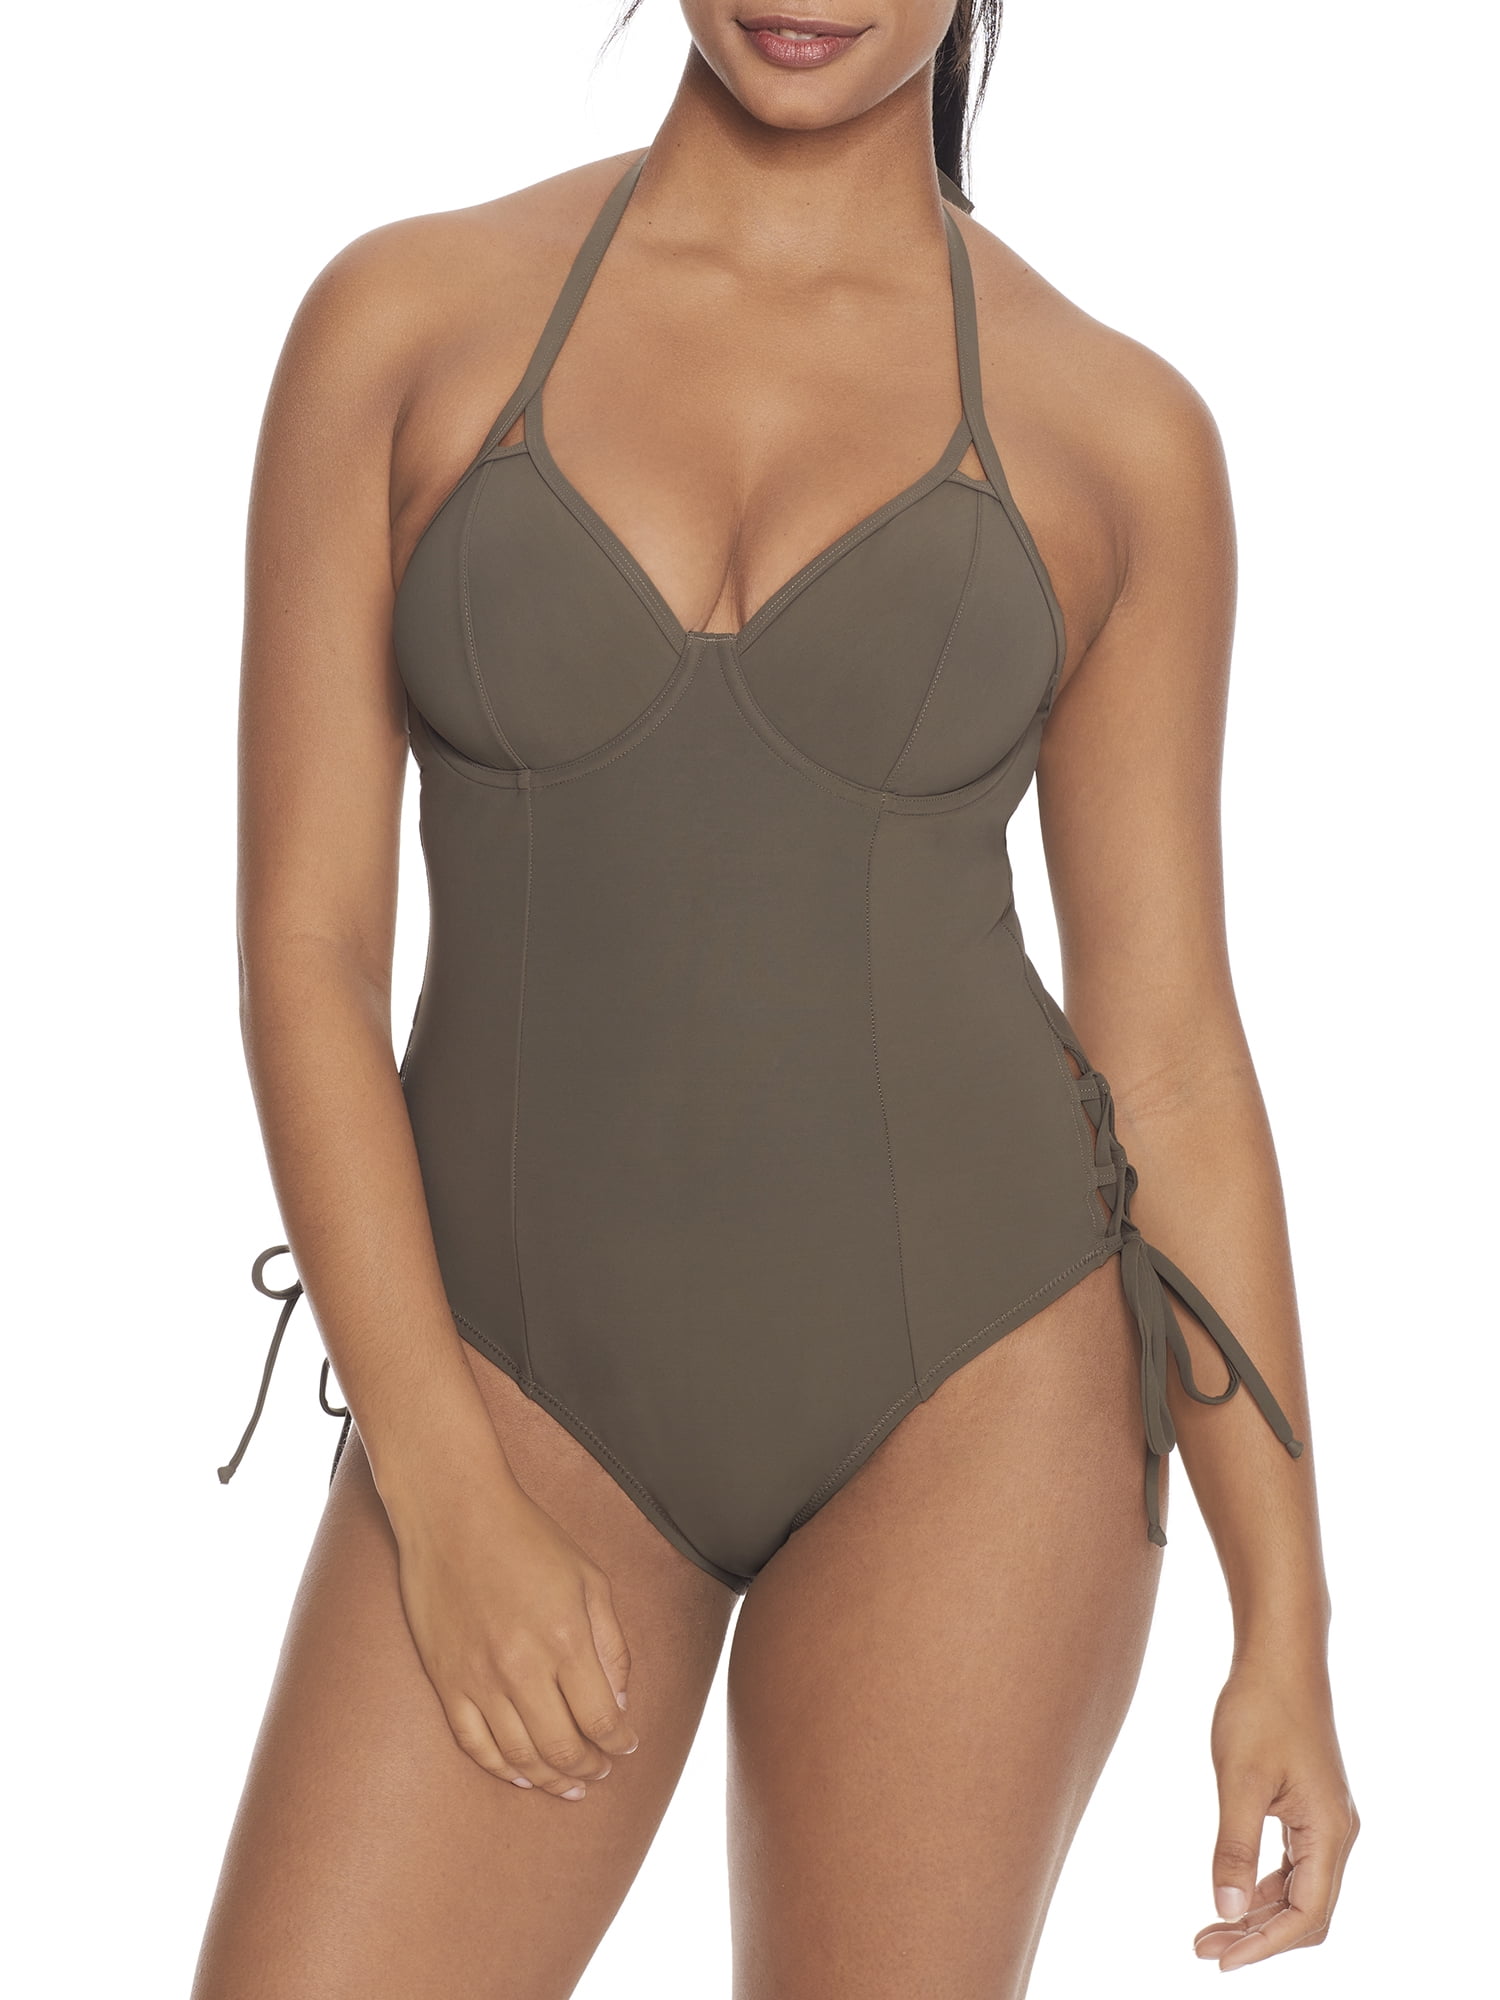 Miss Mandalay OLIVE Icon Plunge Underwire One-Piece Swimsuit, US 36H, UK  36FF 